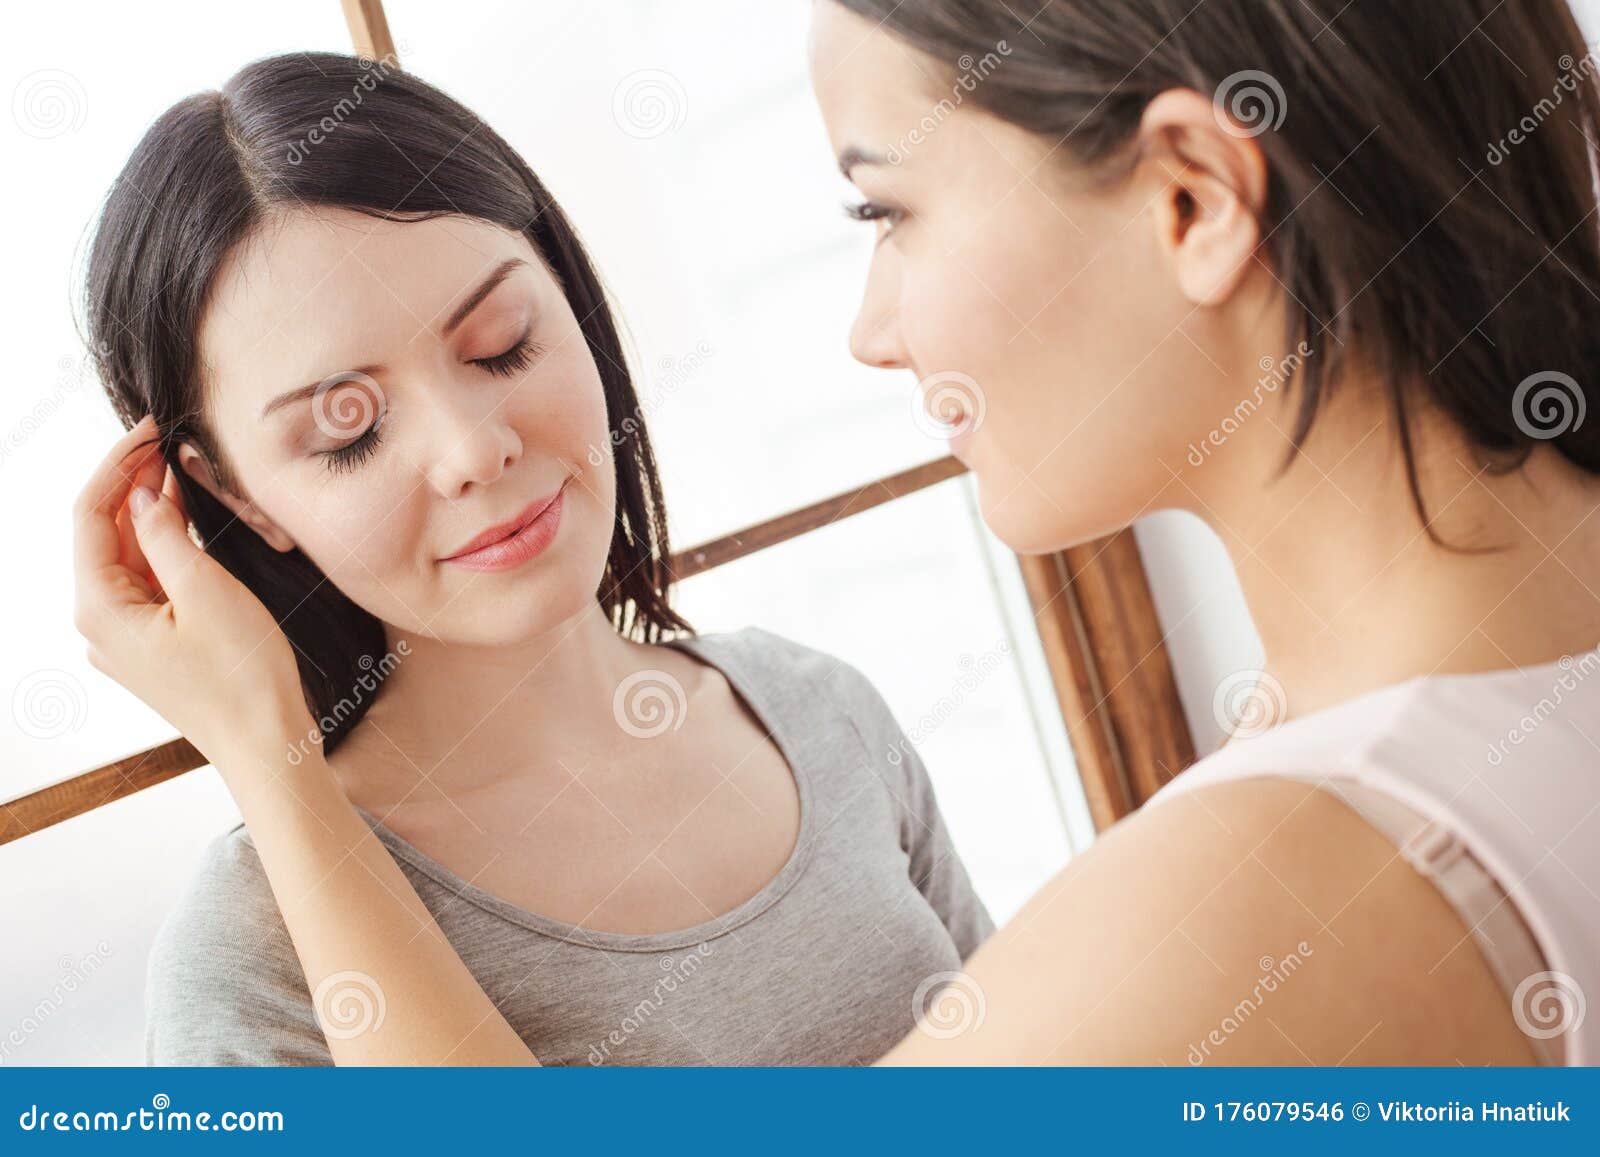 Lesbian Couple In Bedroom At Home Standing One Woman